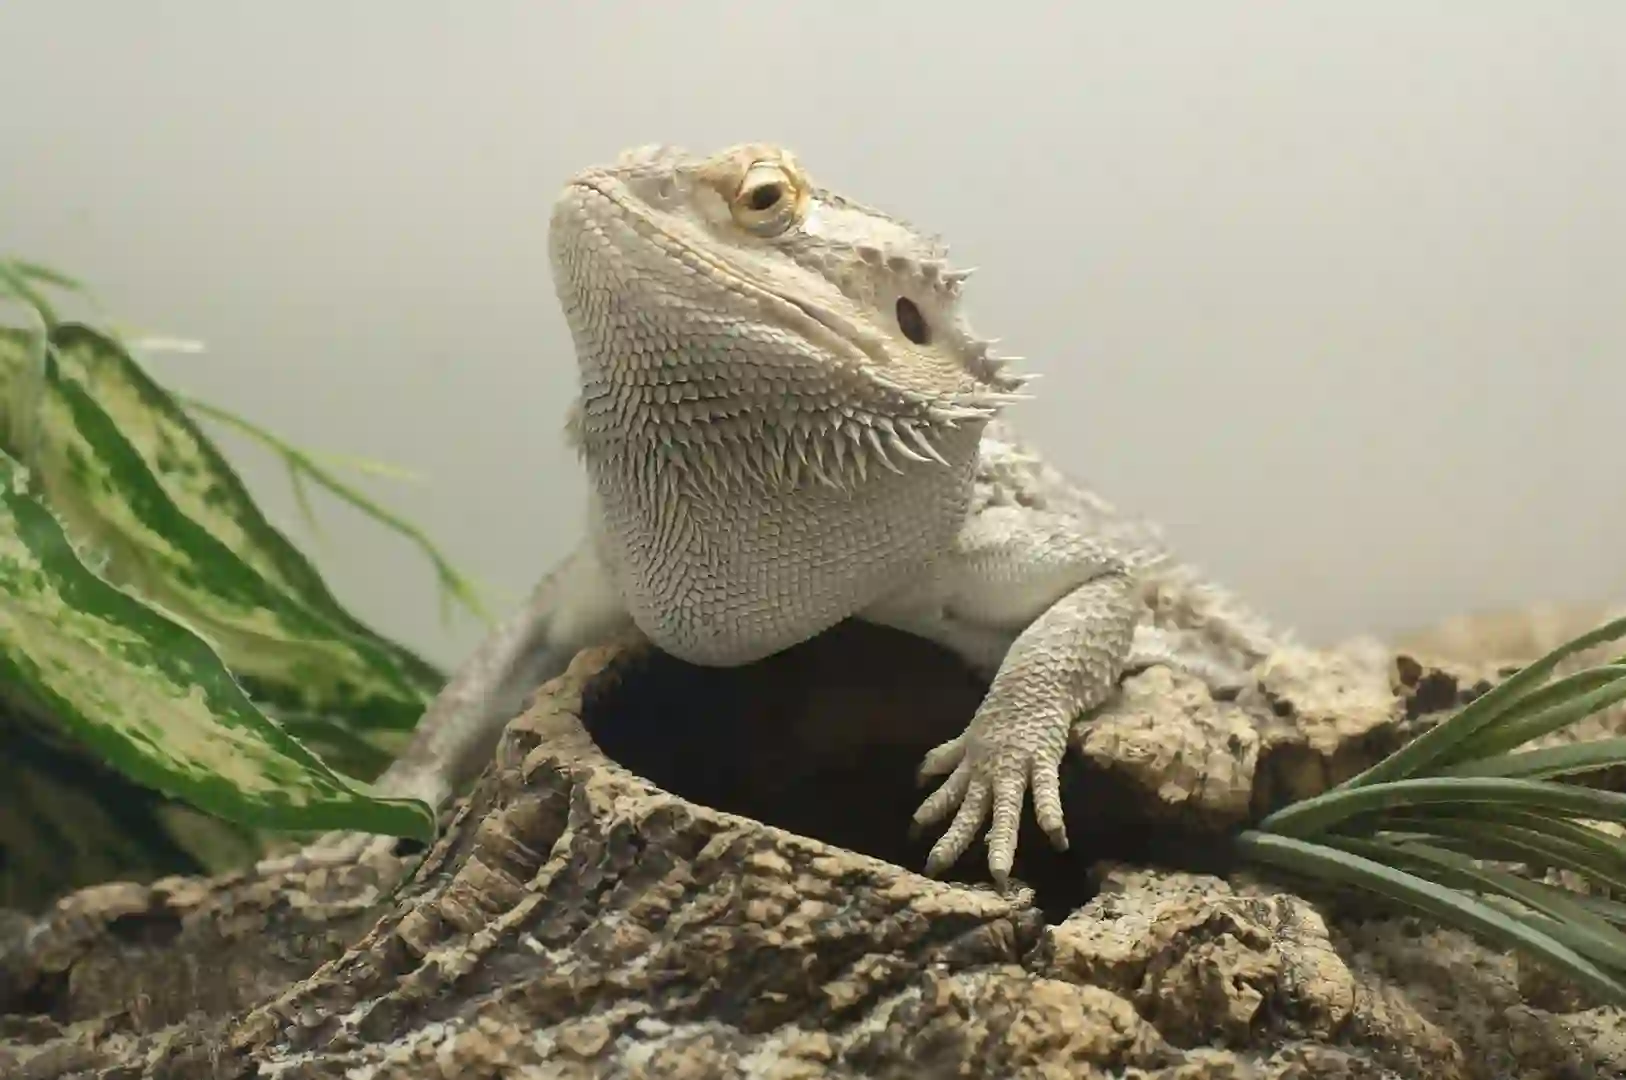 How To Tell If A Baby Bearded Dragon Is Male Or Female?